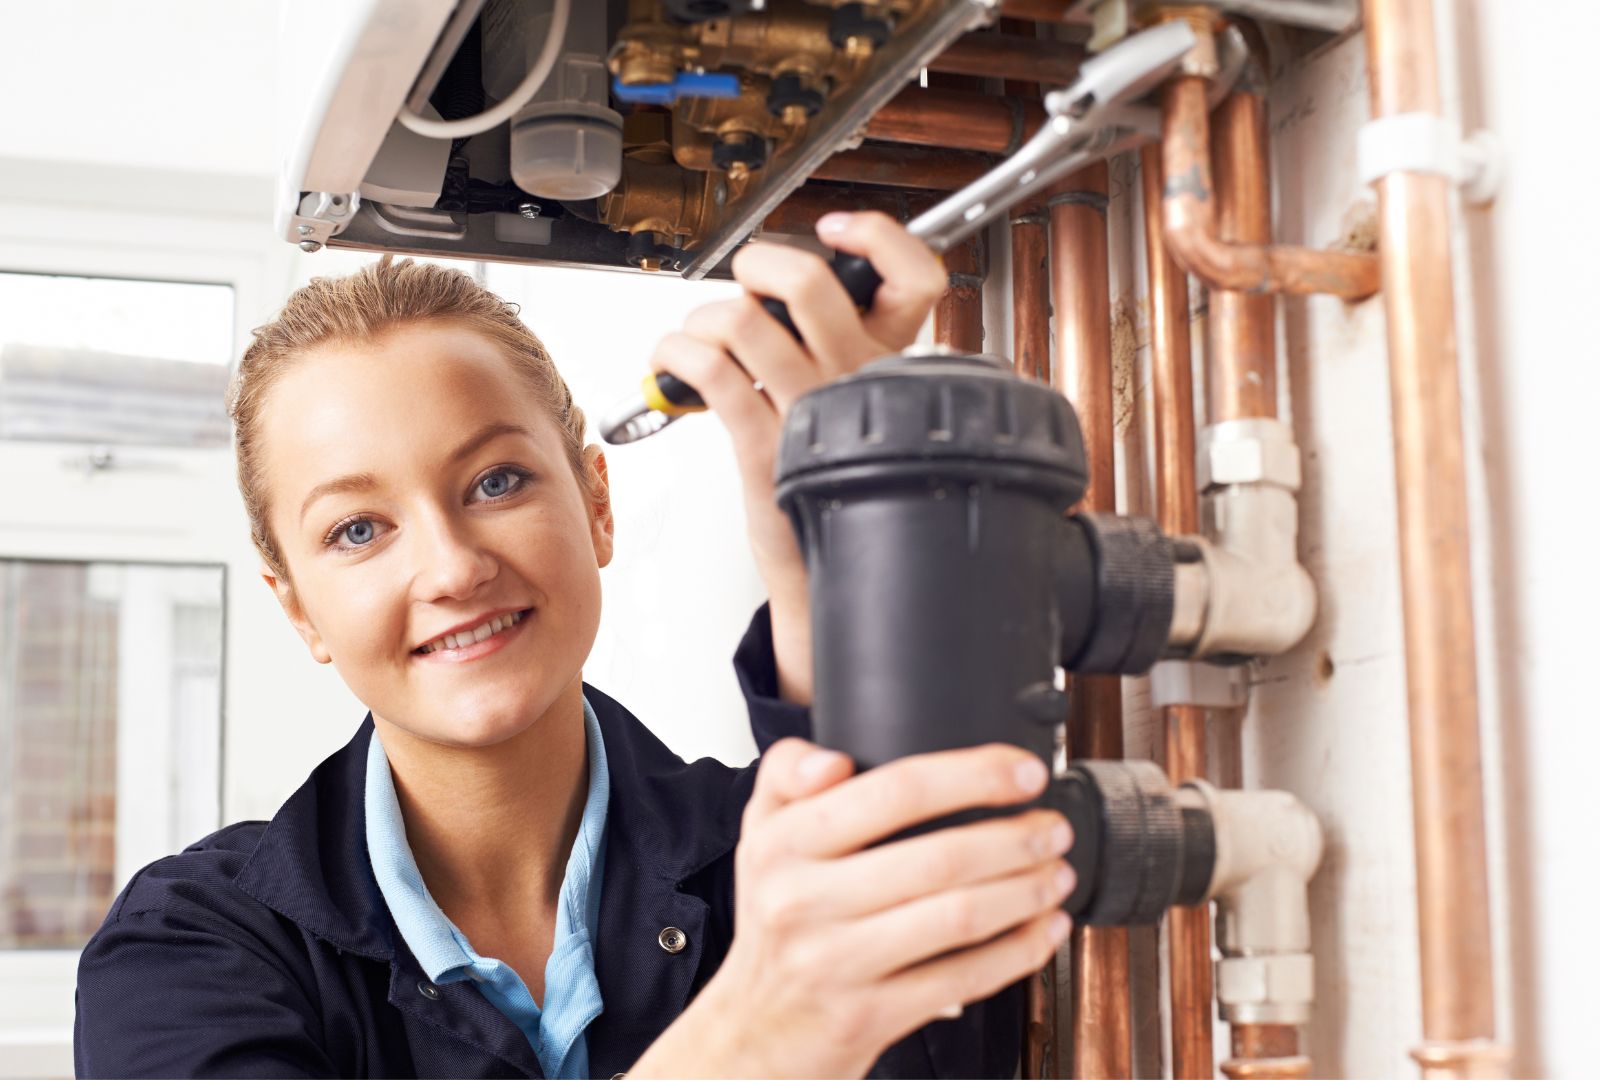 BOILER REPLACEMENT? If You Do It Smartly, It’s Simple